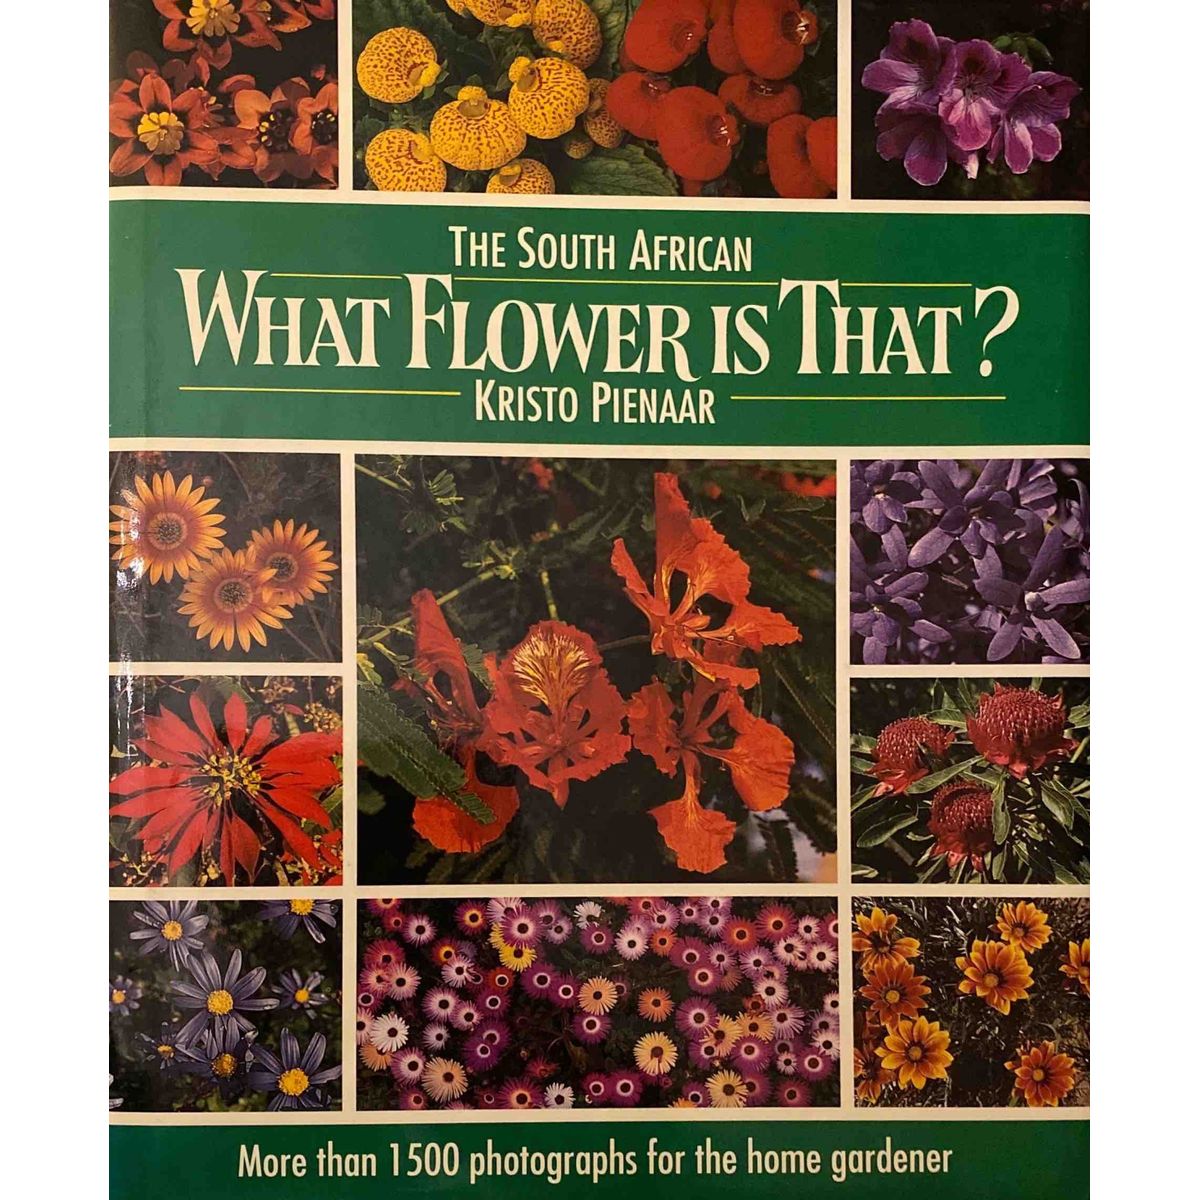 ISBN: 9781868252756 / 1868252752 - The South African What Flower is That? by Kristo Pienaar [1992]